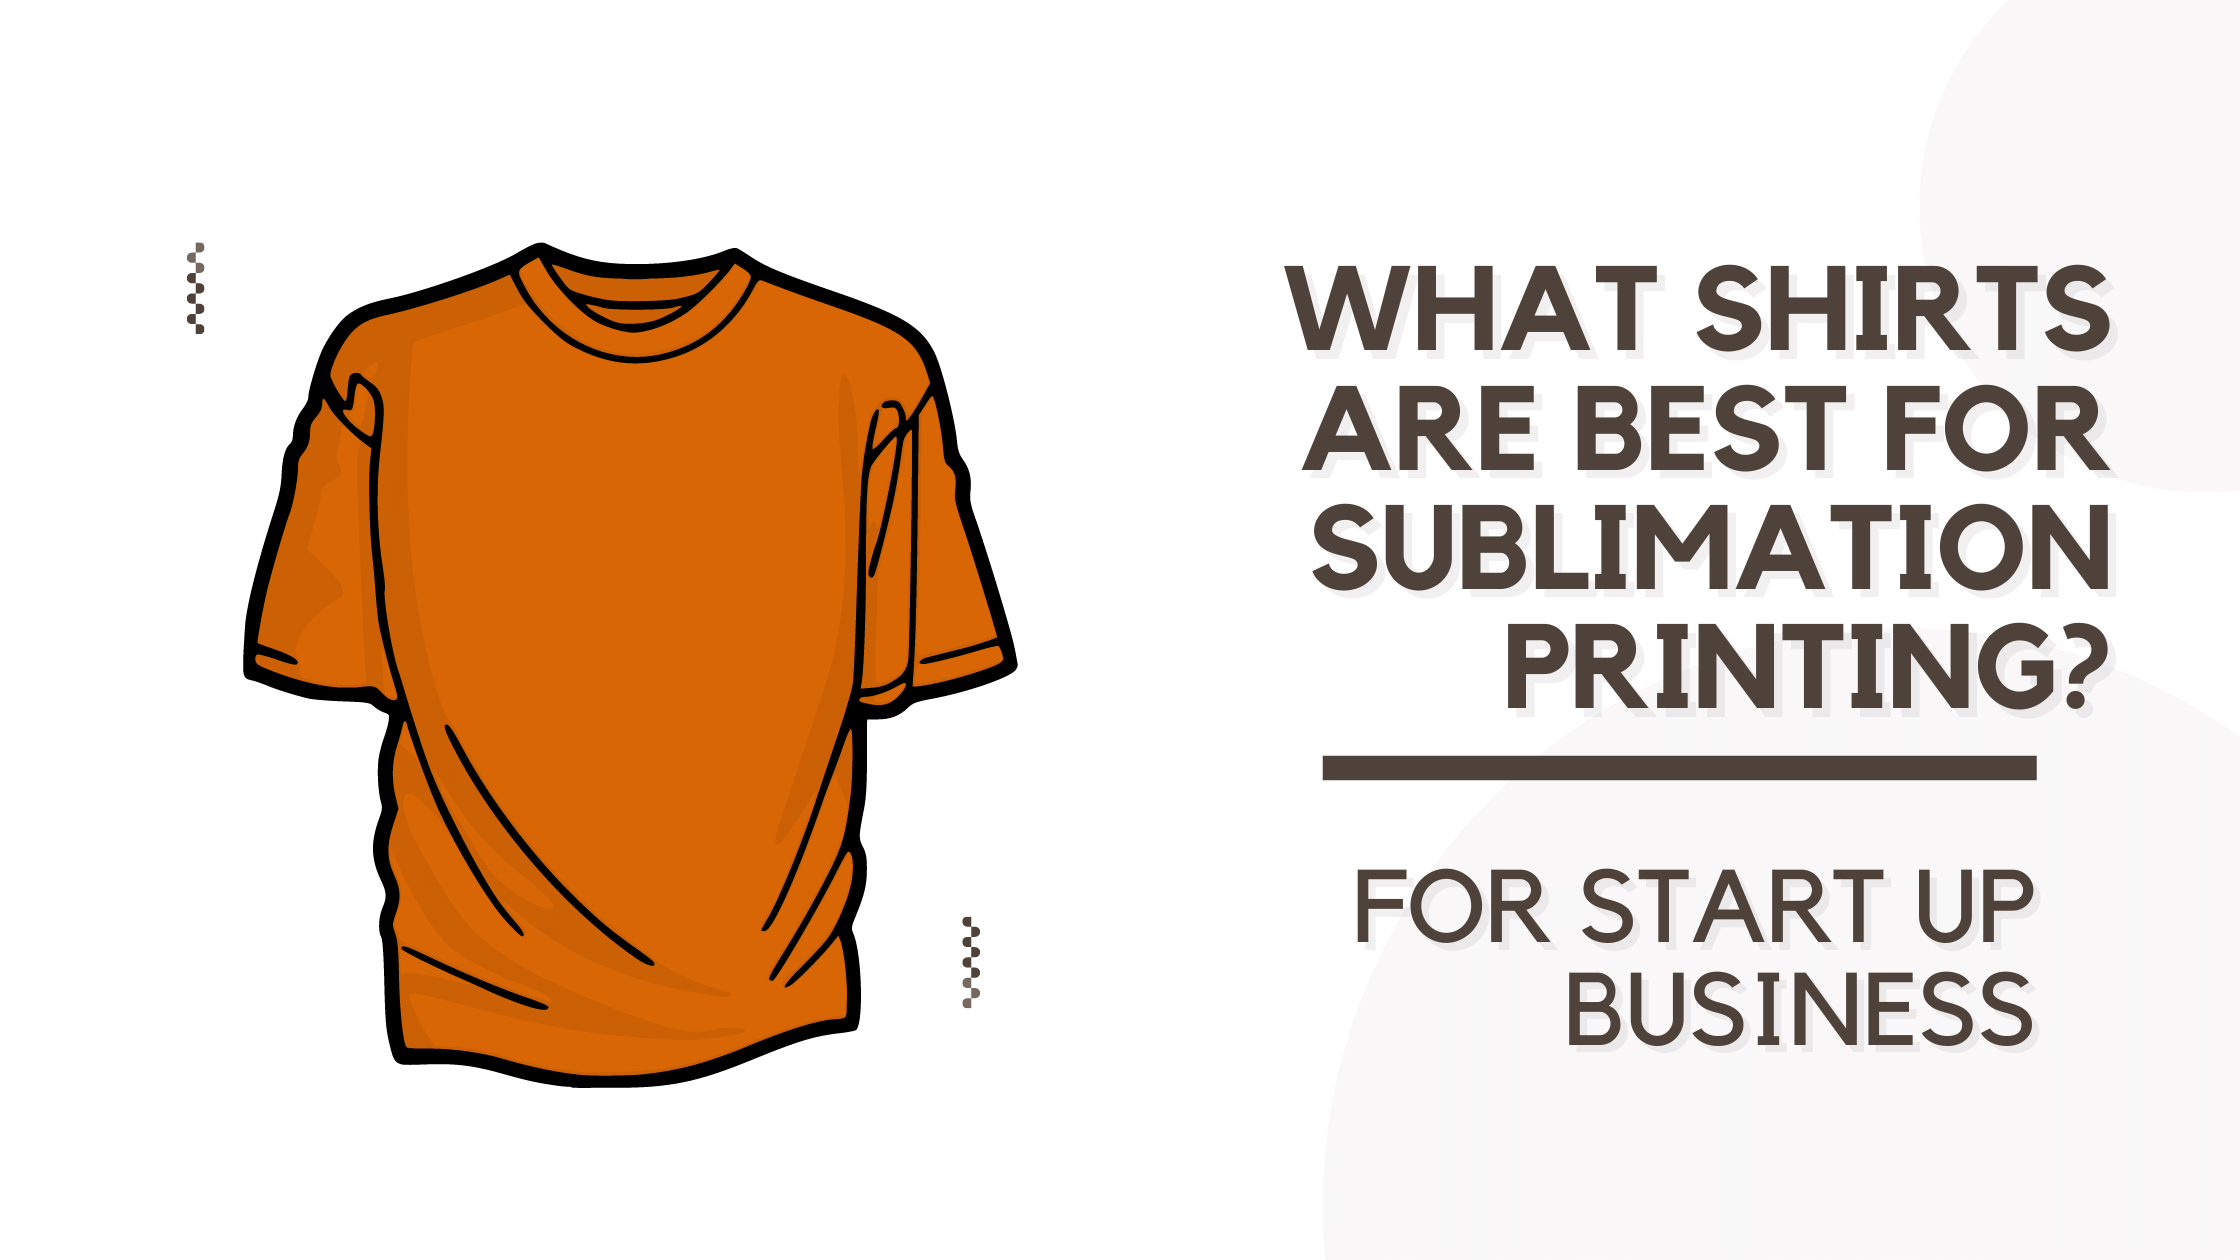 What shirts are best for sublimation printing?